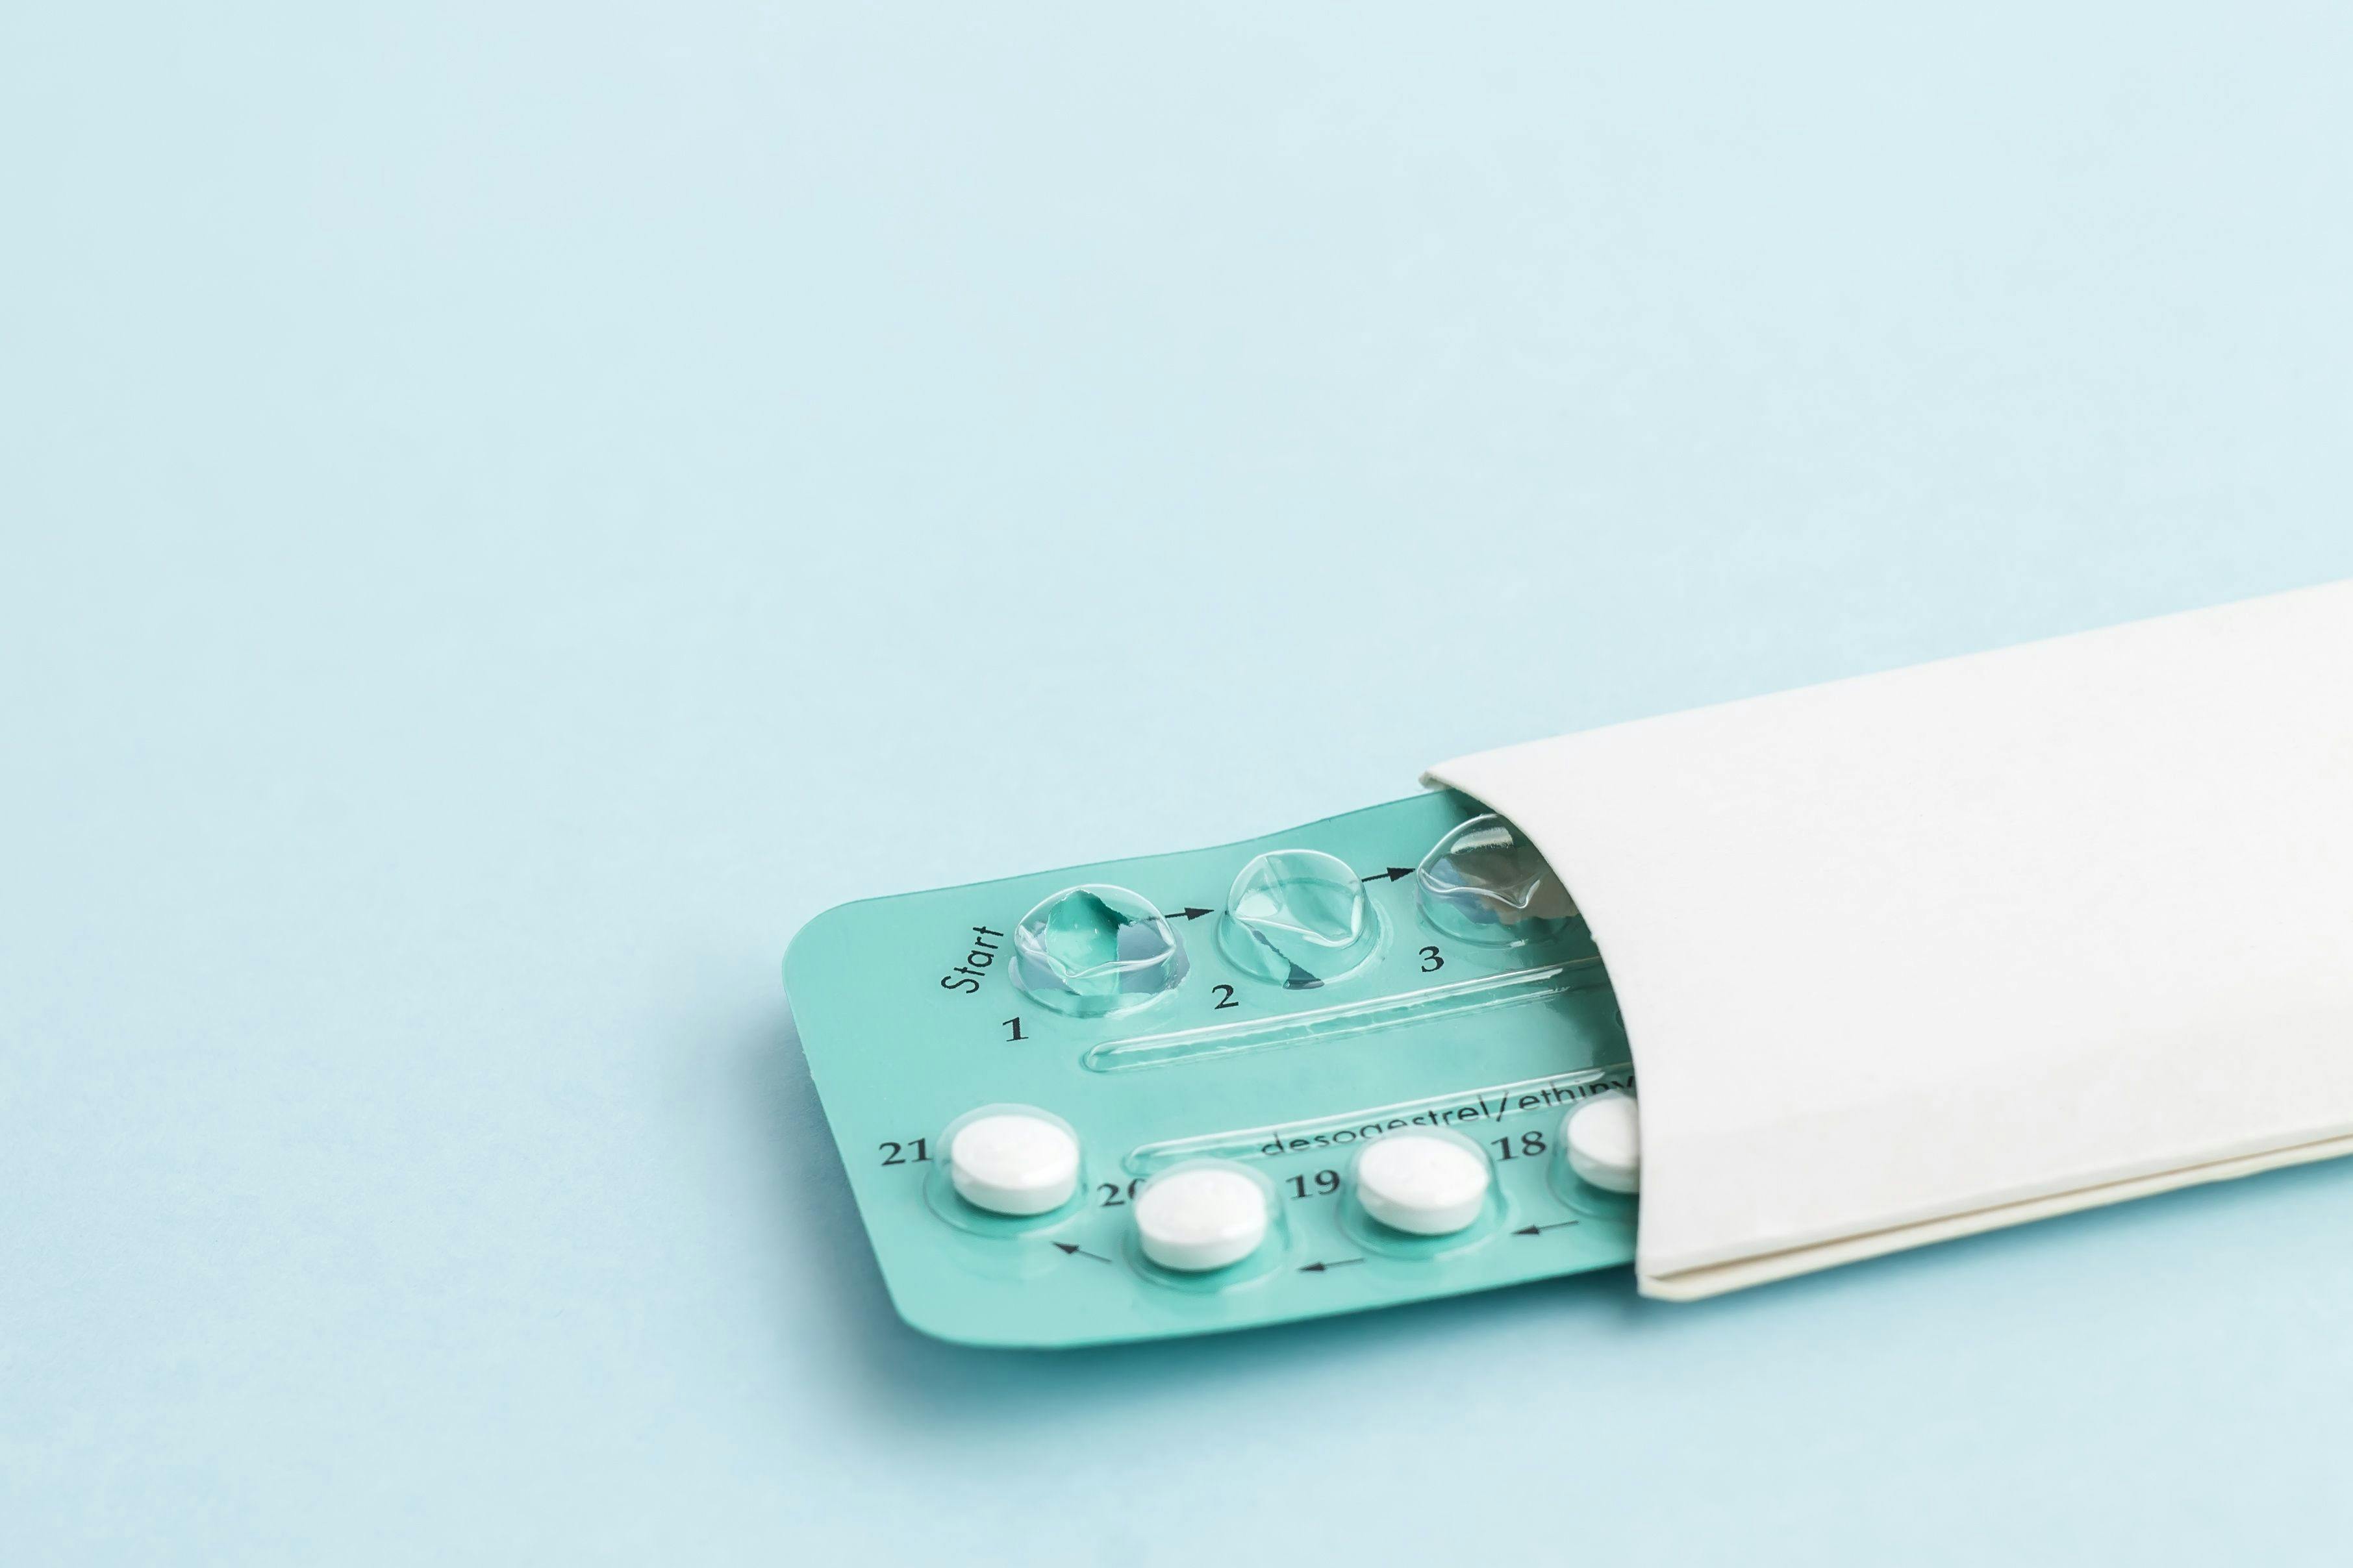 Study examines switching intentions in contraception use